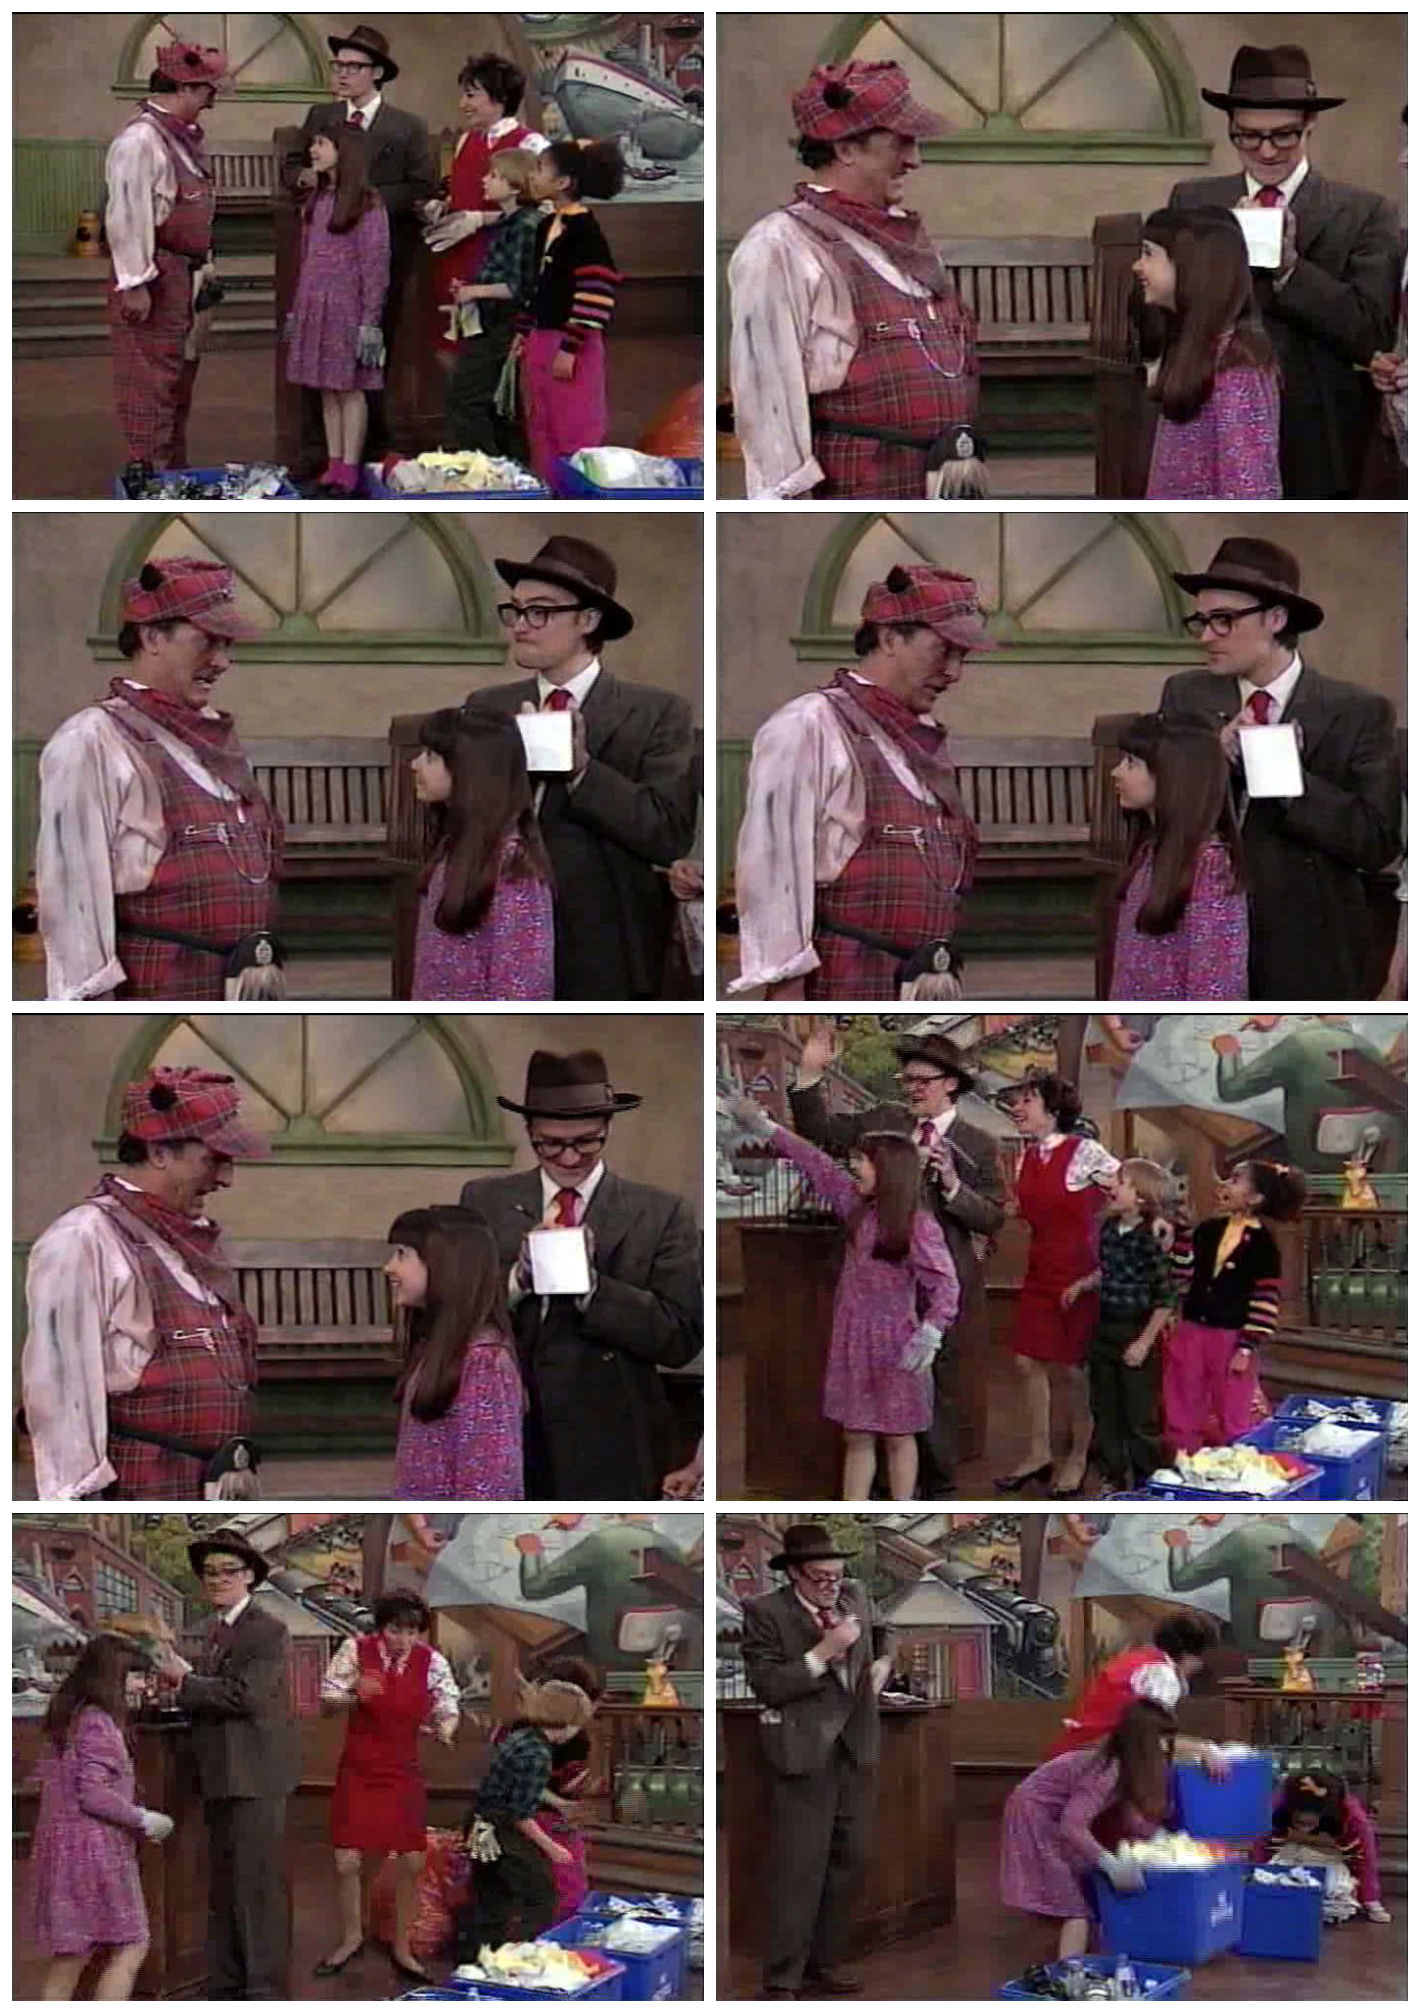 Shining Time Station 3.04 - Stacy Clears Up - Screen Captures 17
